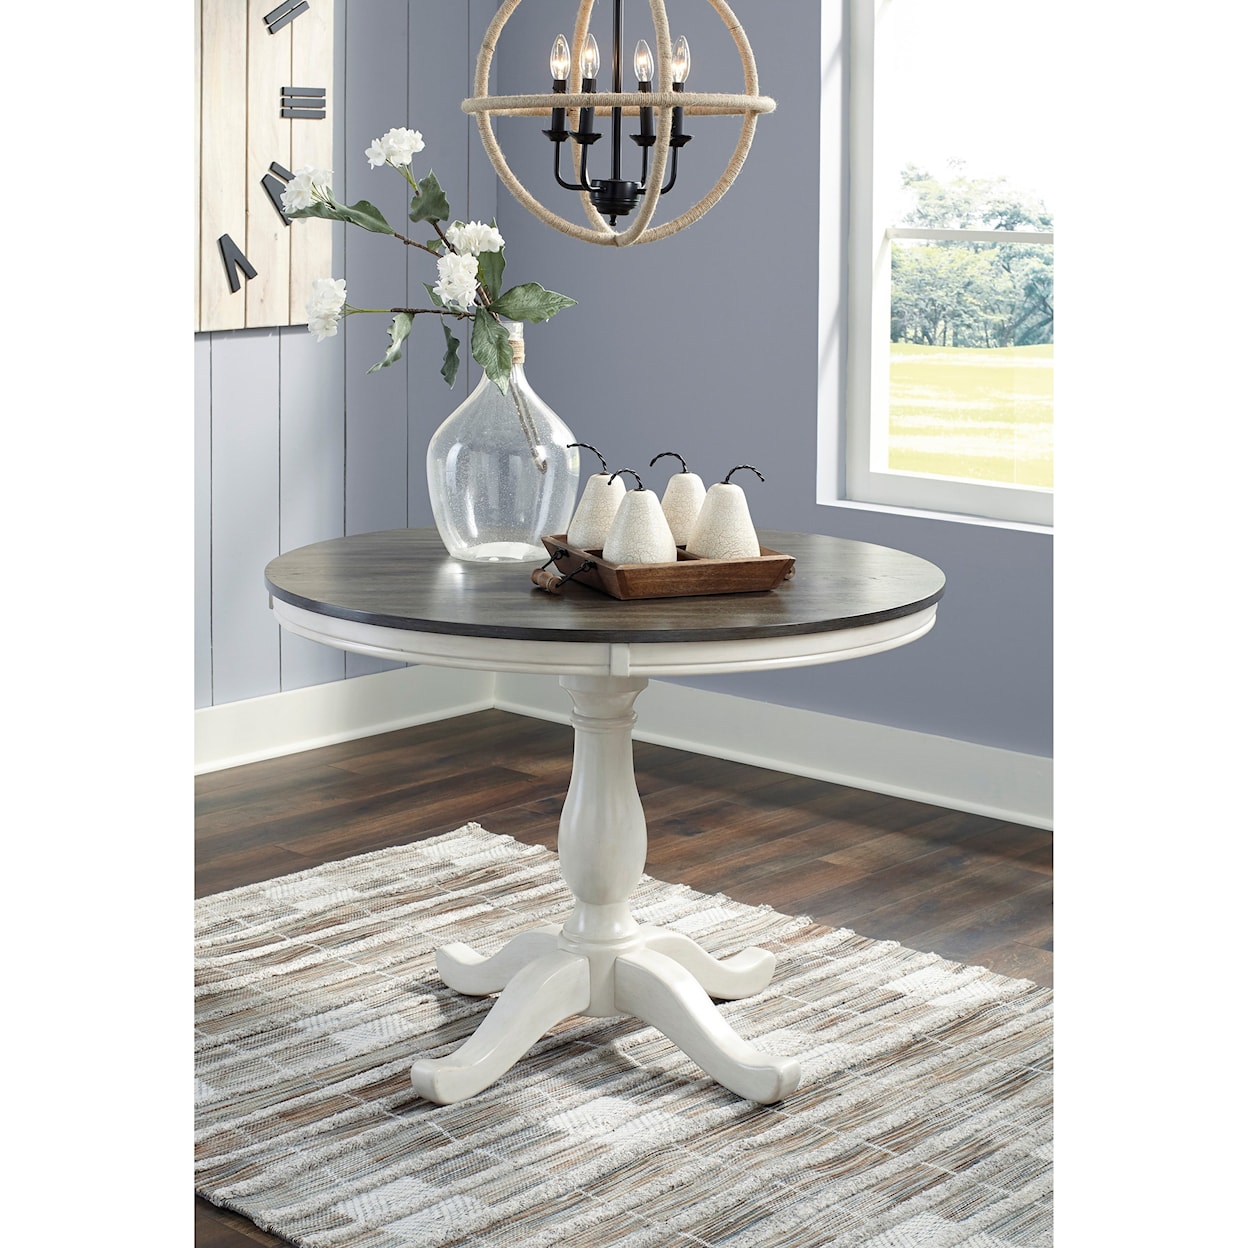 Signature Design by Ashley Nelling Dining Room Table